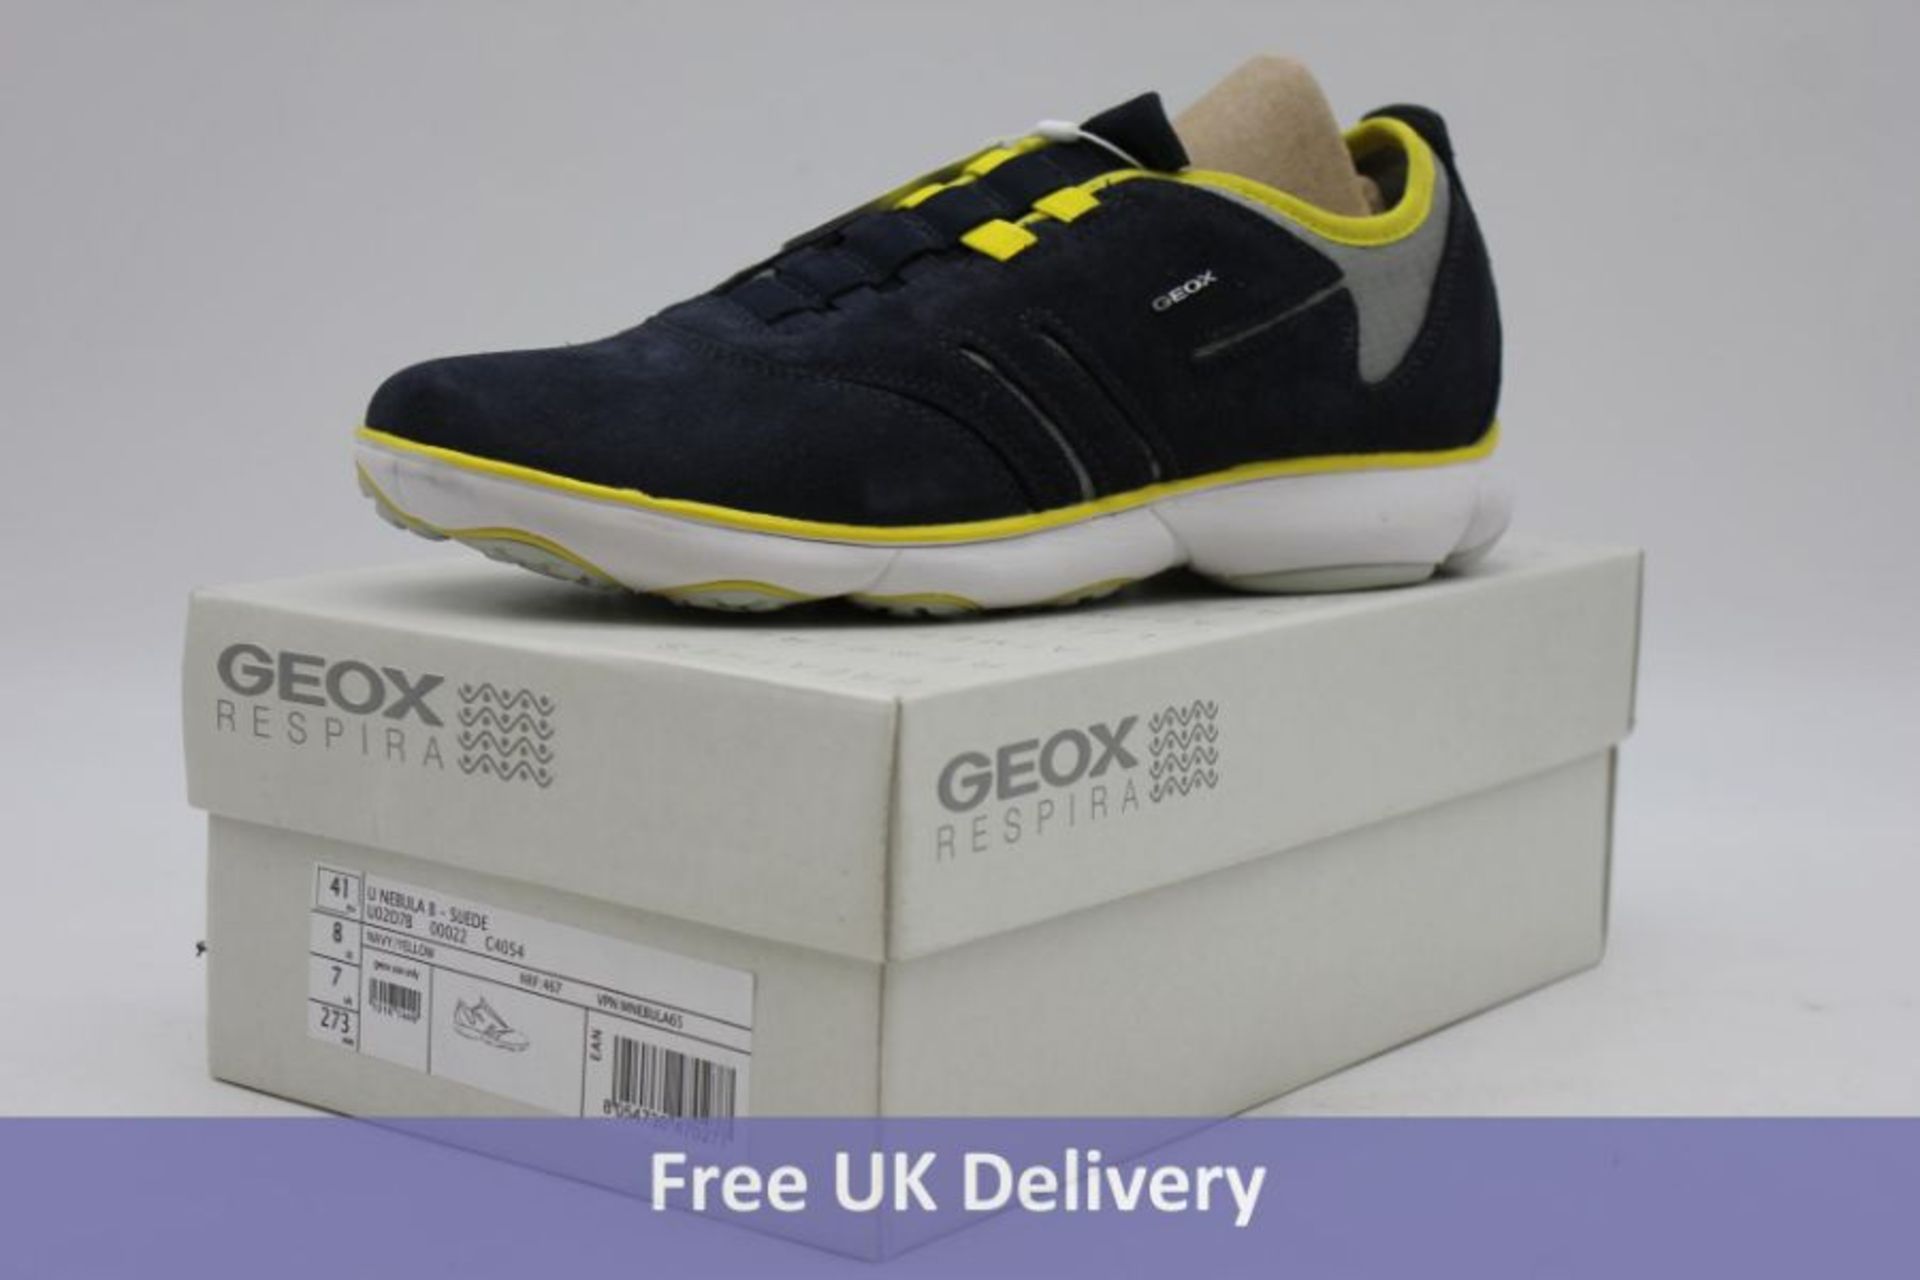 Two pairs of Geox Trainers to include 1x Nebula Suede Sneakers, Navy/Yellow, UK 7 and 1x Nebula Text